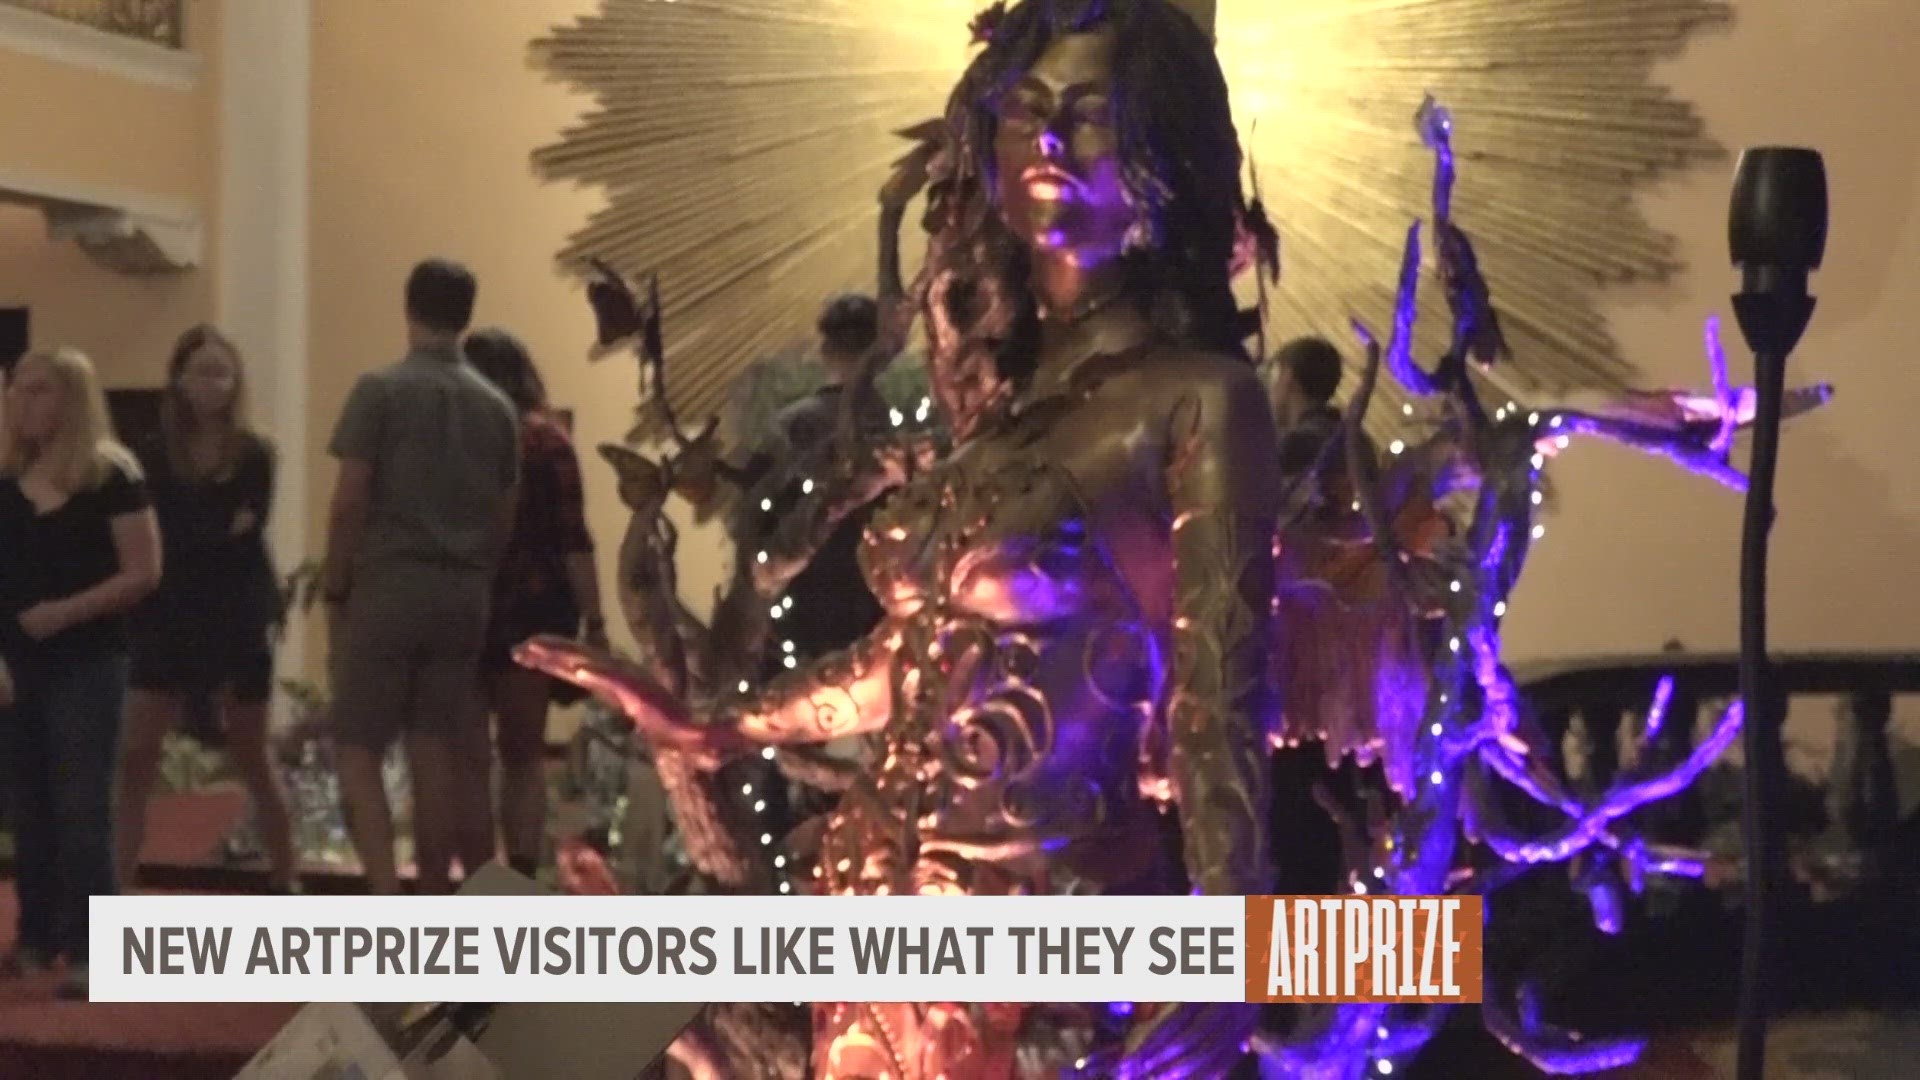 With the first weekend of ArtPrize 2.0 underway, those attending are enjoying their experience.